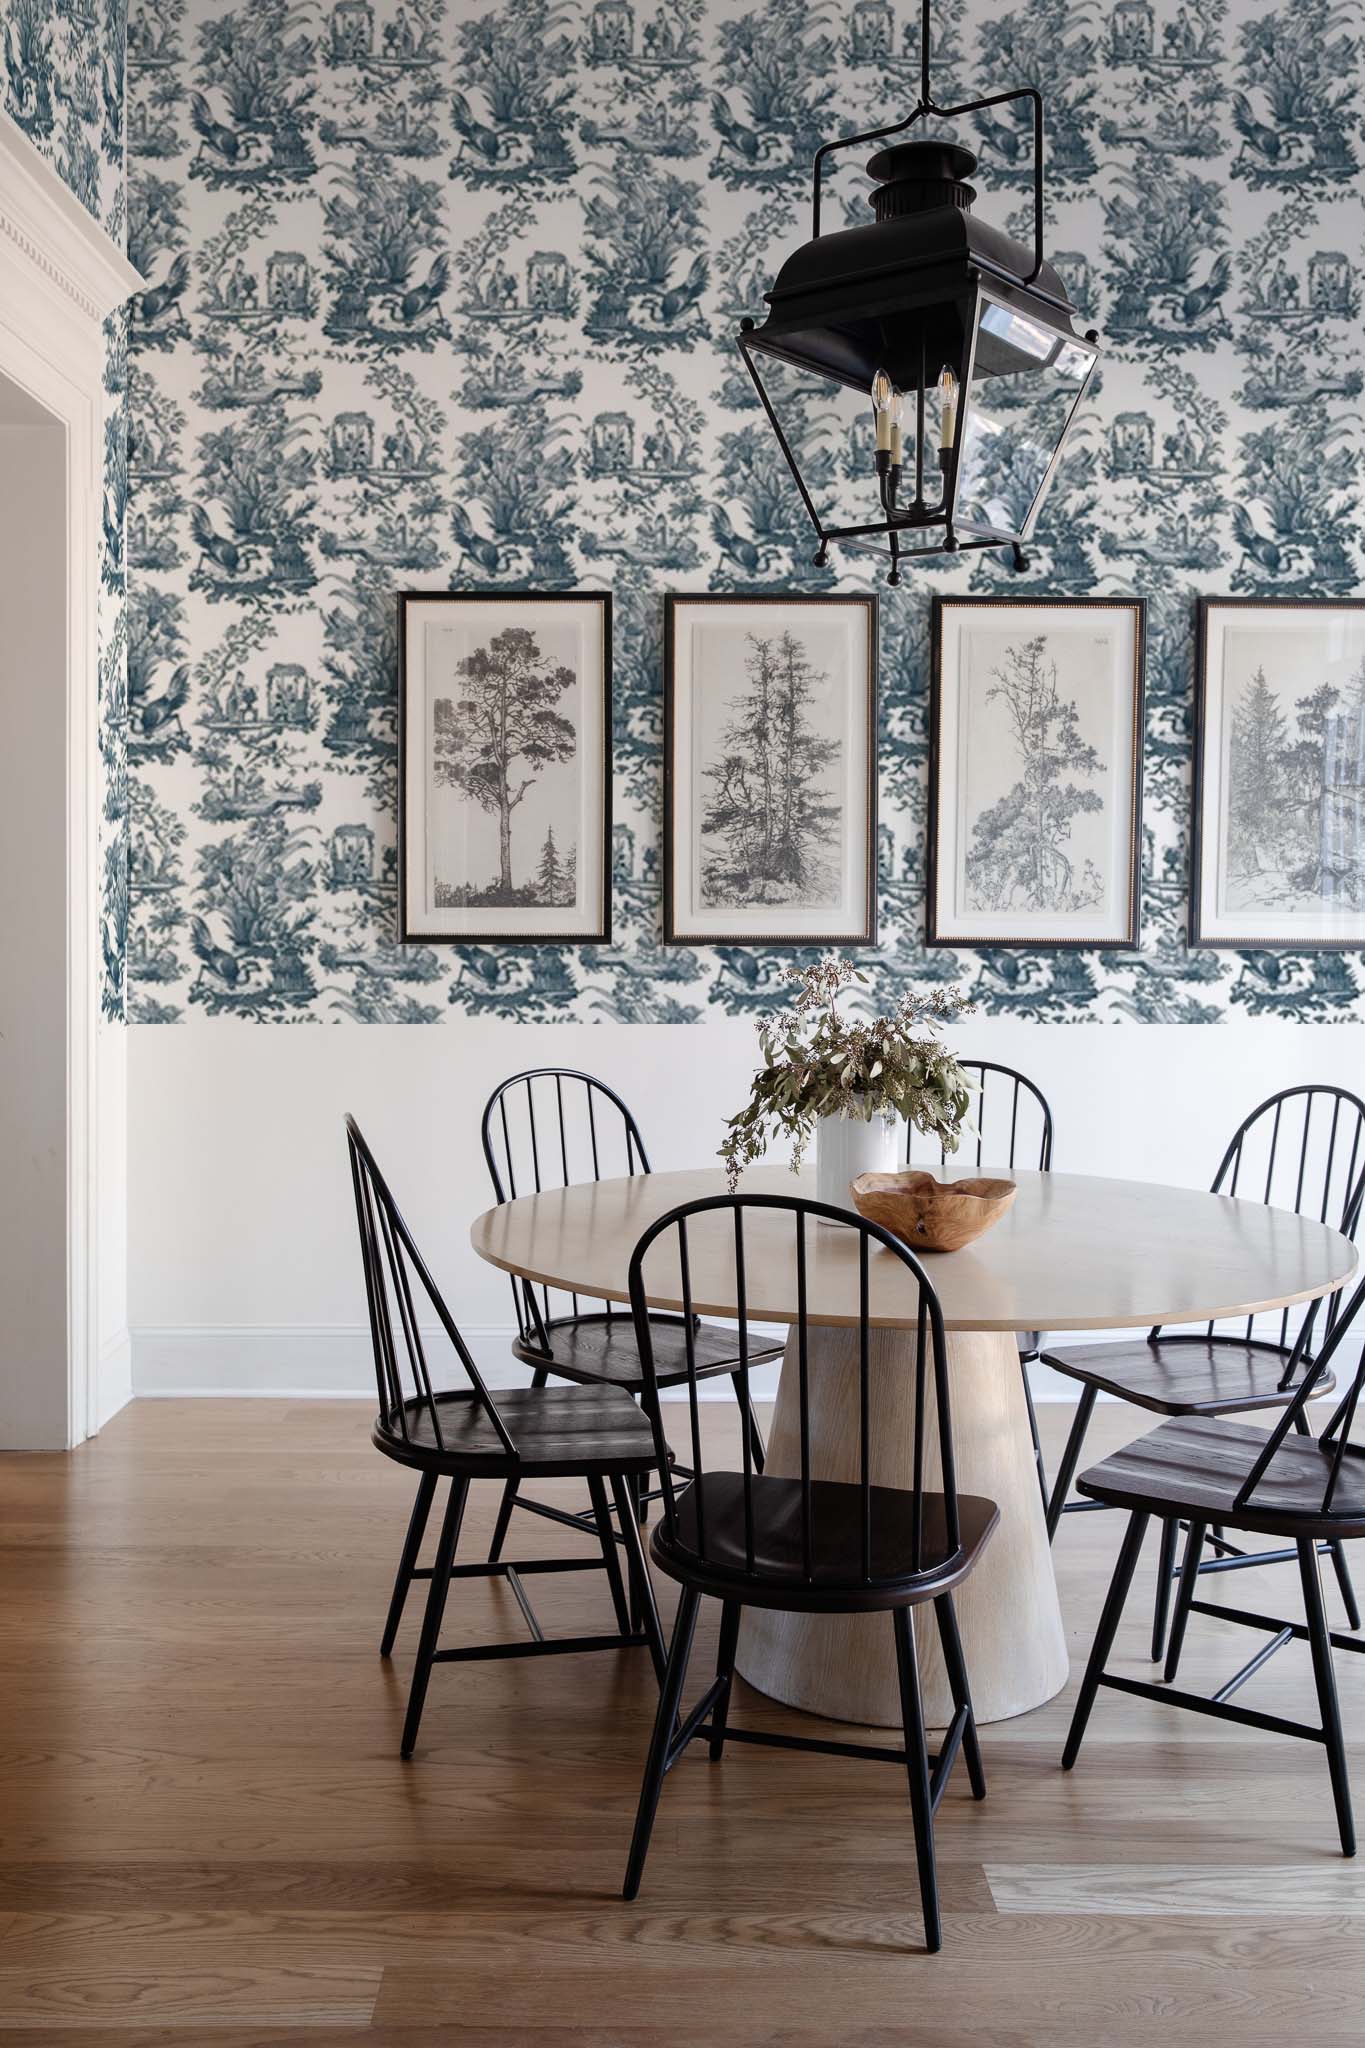 Deciding on Toile Wallpaper Over Stripes in the Dining Room...kind of. -  Chris Loves Julia